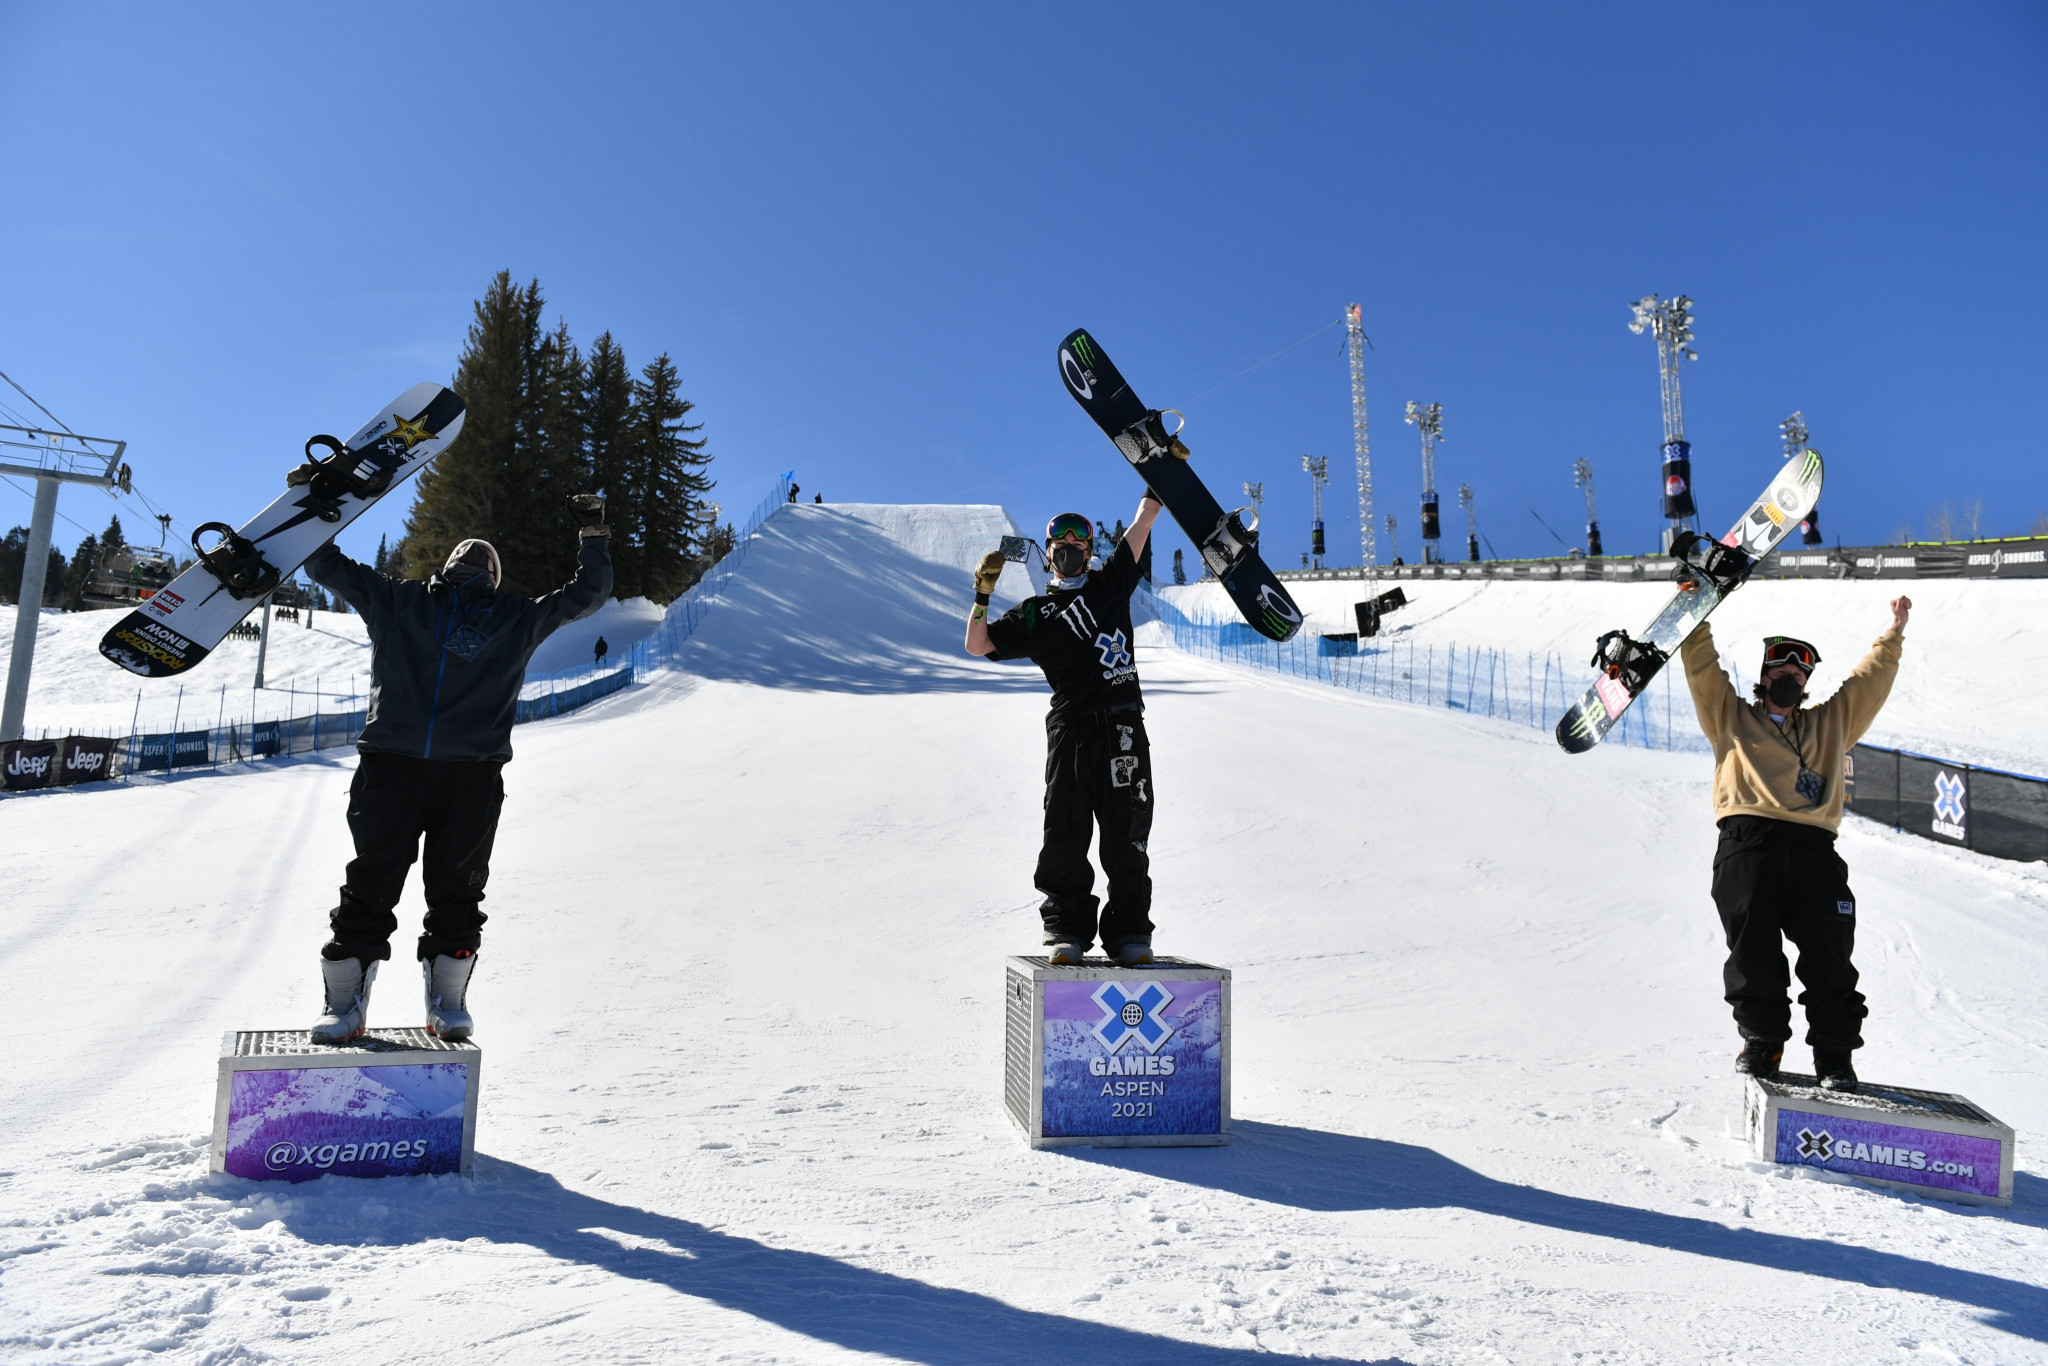 On X Games debut, 17-year-old Dusty Henricksen won two gold medals ©Twitter/XGames